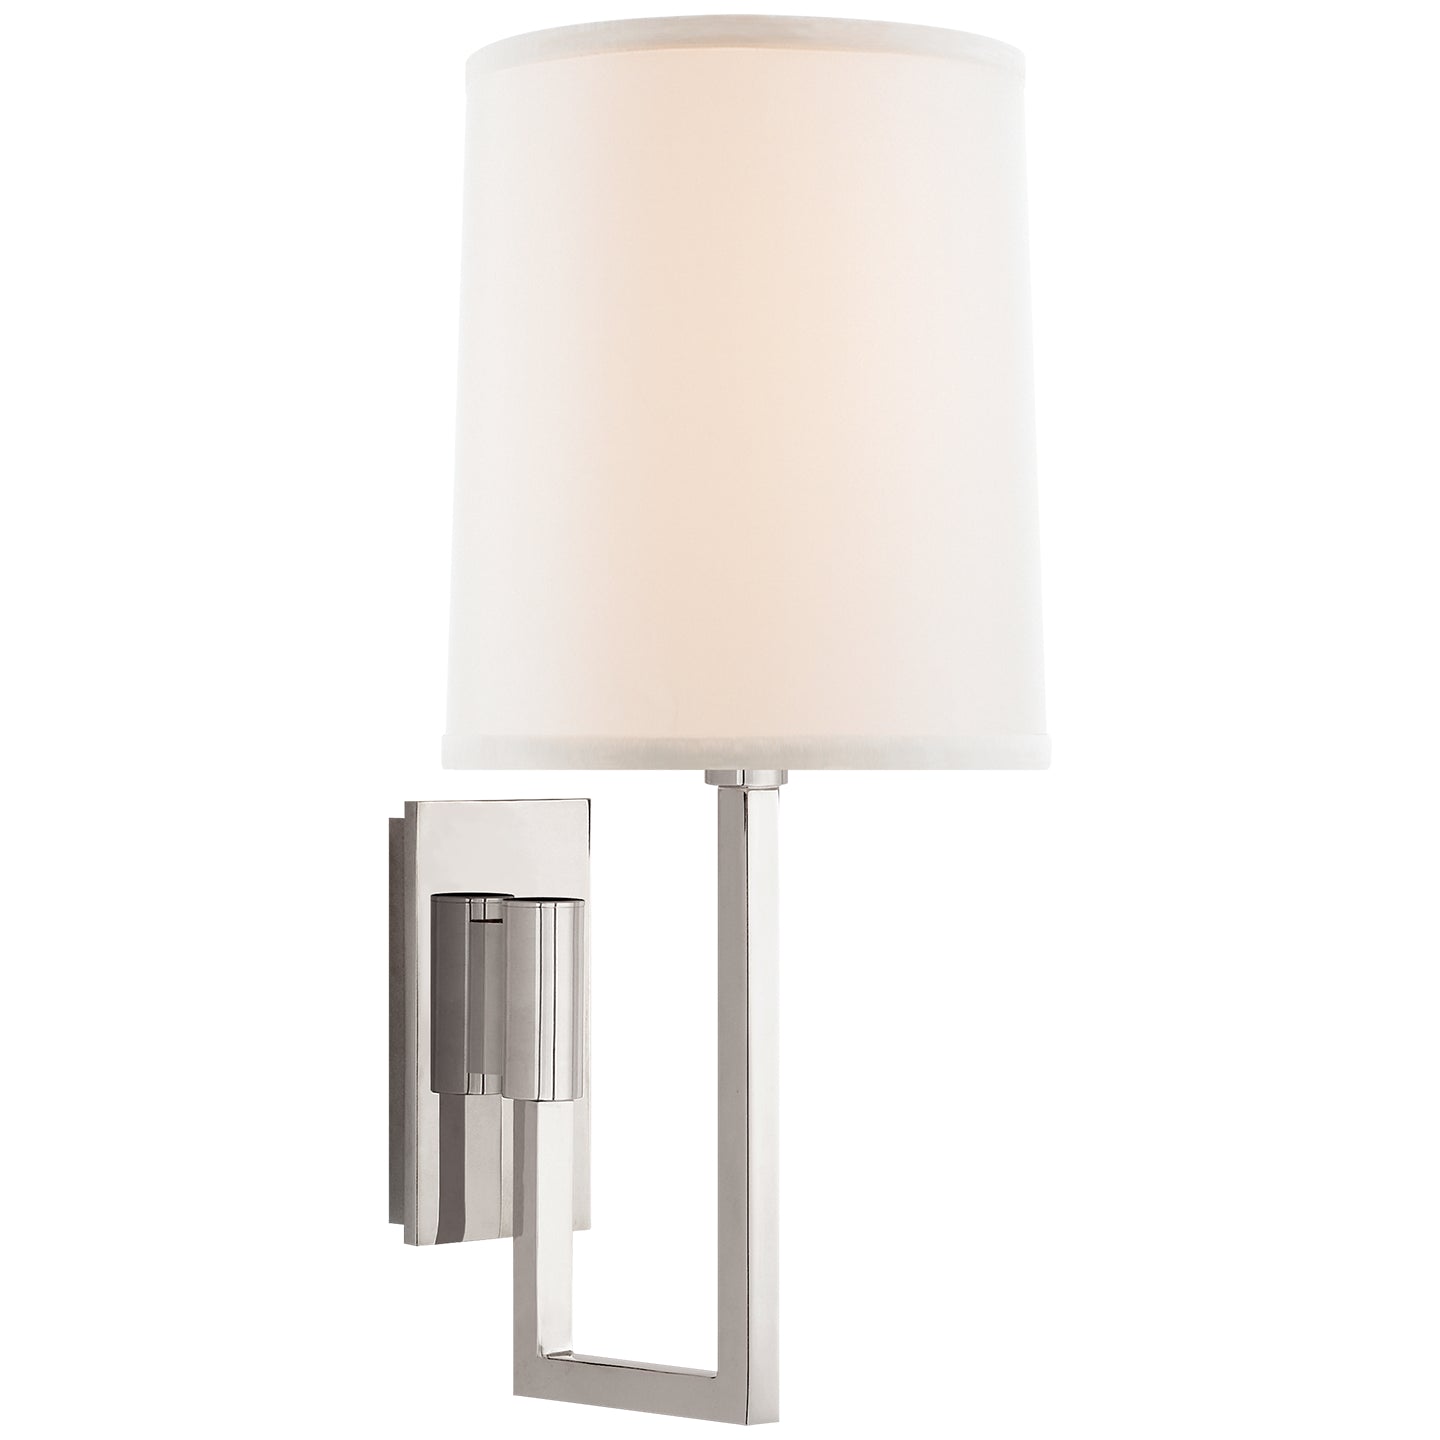 Visual Comfort Signature - BBL 2027PN-L - One Light Wall Sconce - Aspect - Polished Nickel